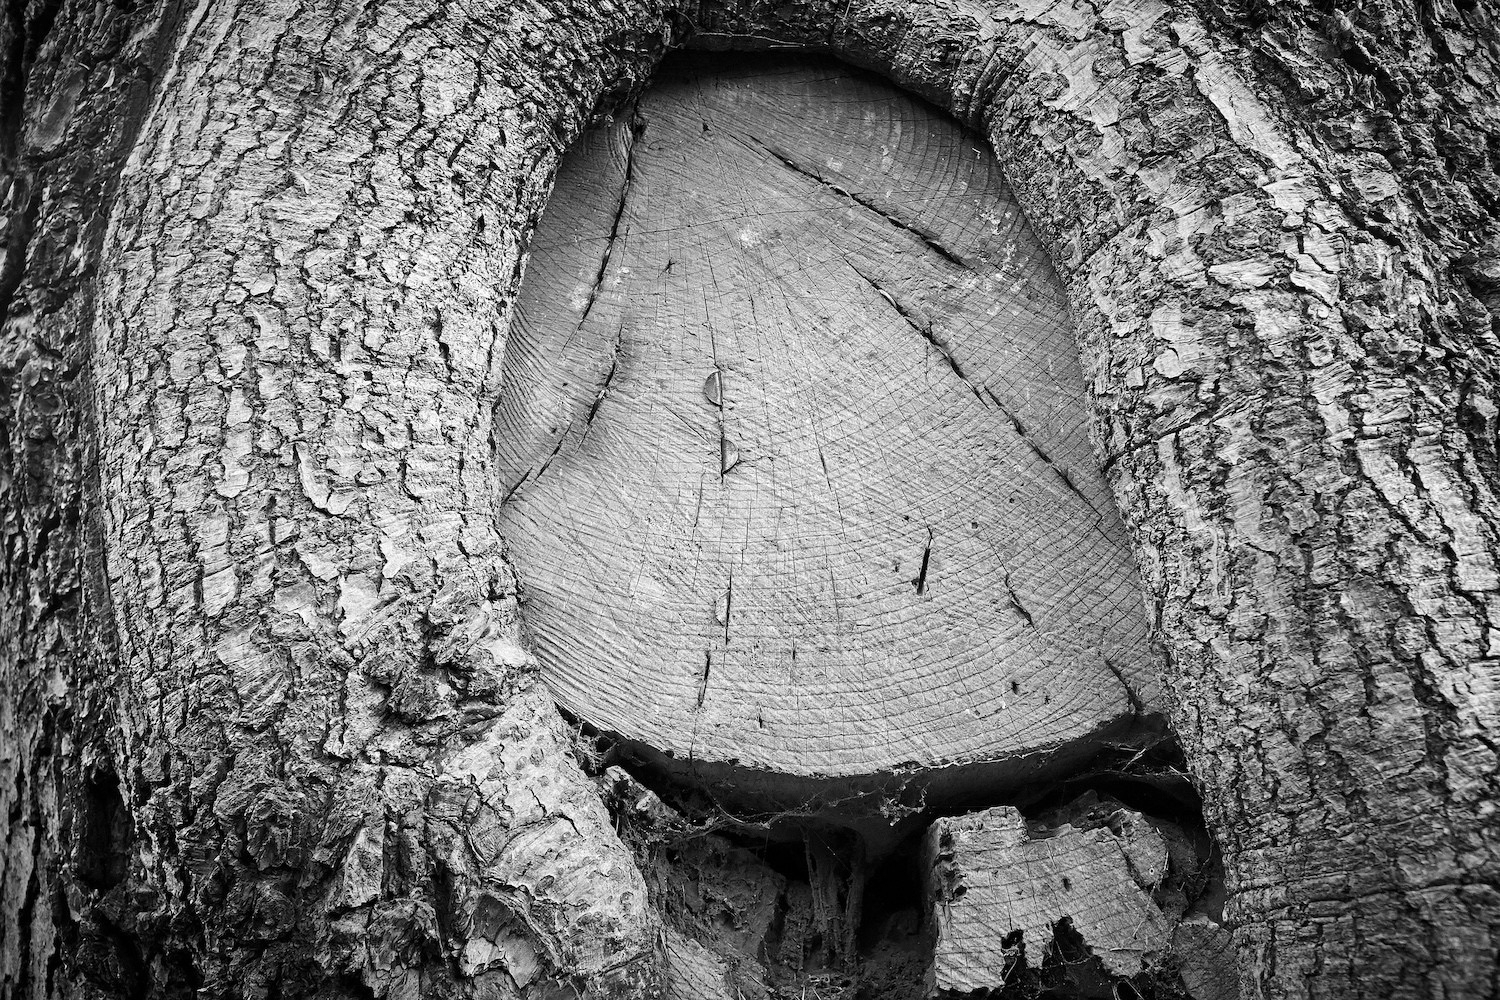 A monochrome closeup of a severed branch on a tree trunk, revealing old coins pushed into cracks in the wood, some bent over.